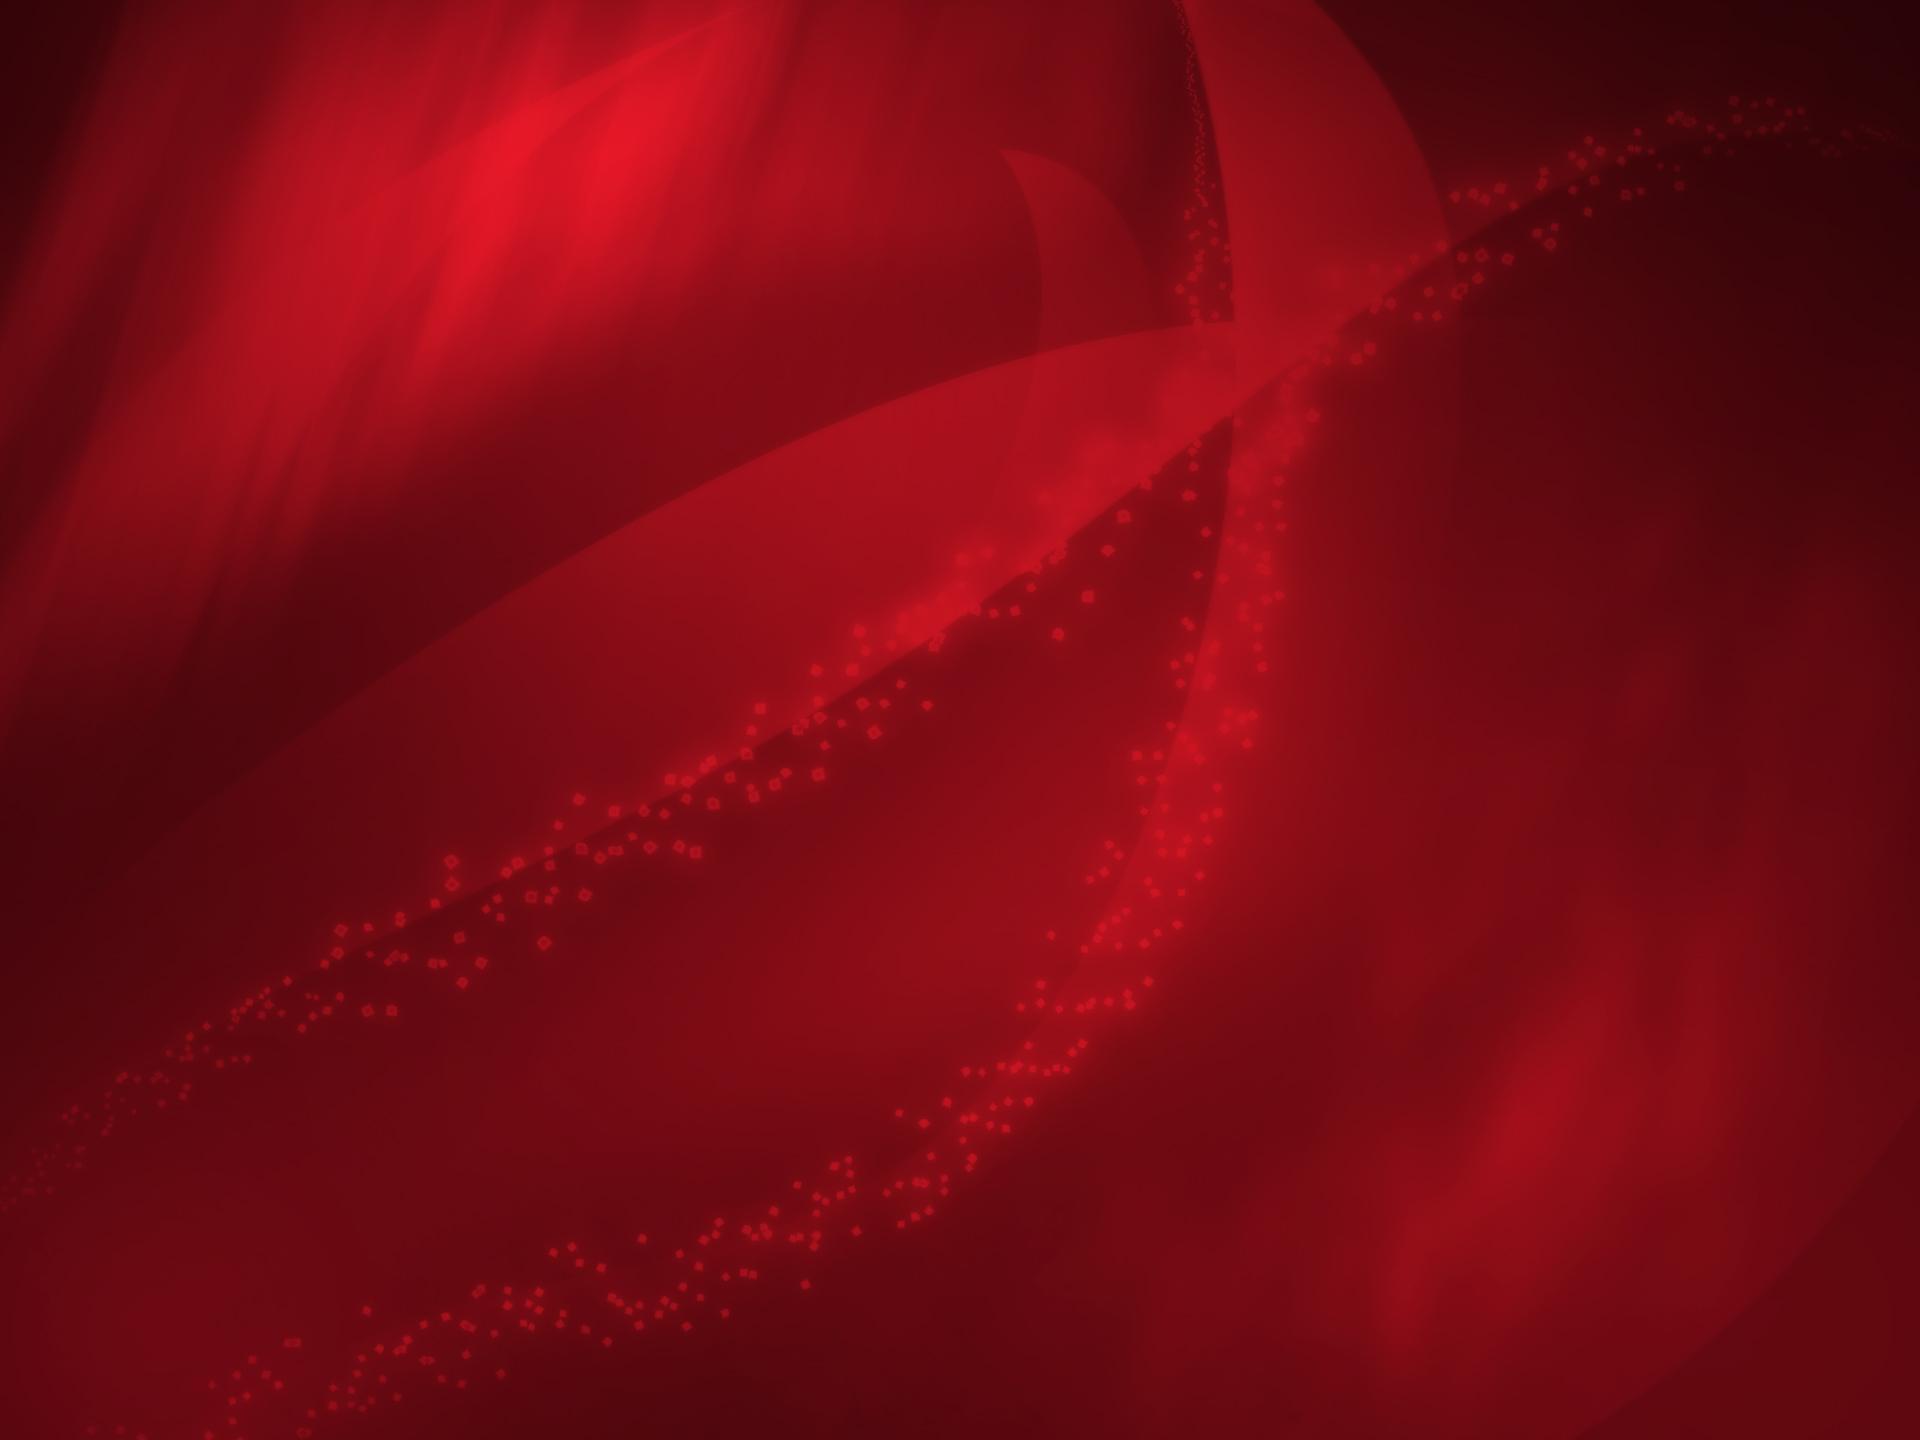 Abstract red waves free desktop background wallpaper image